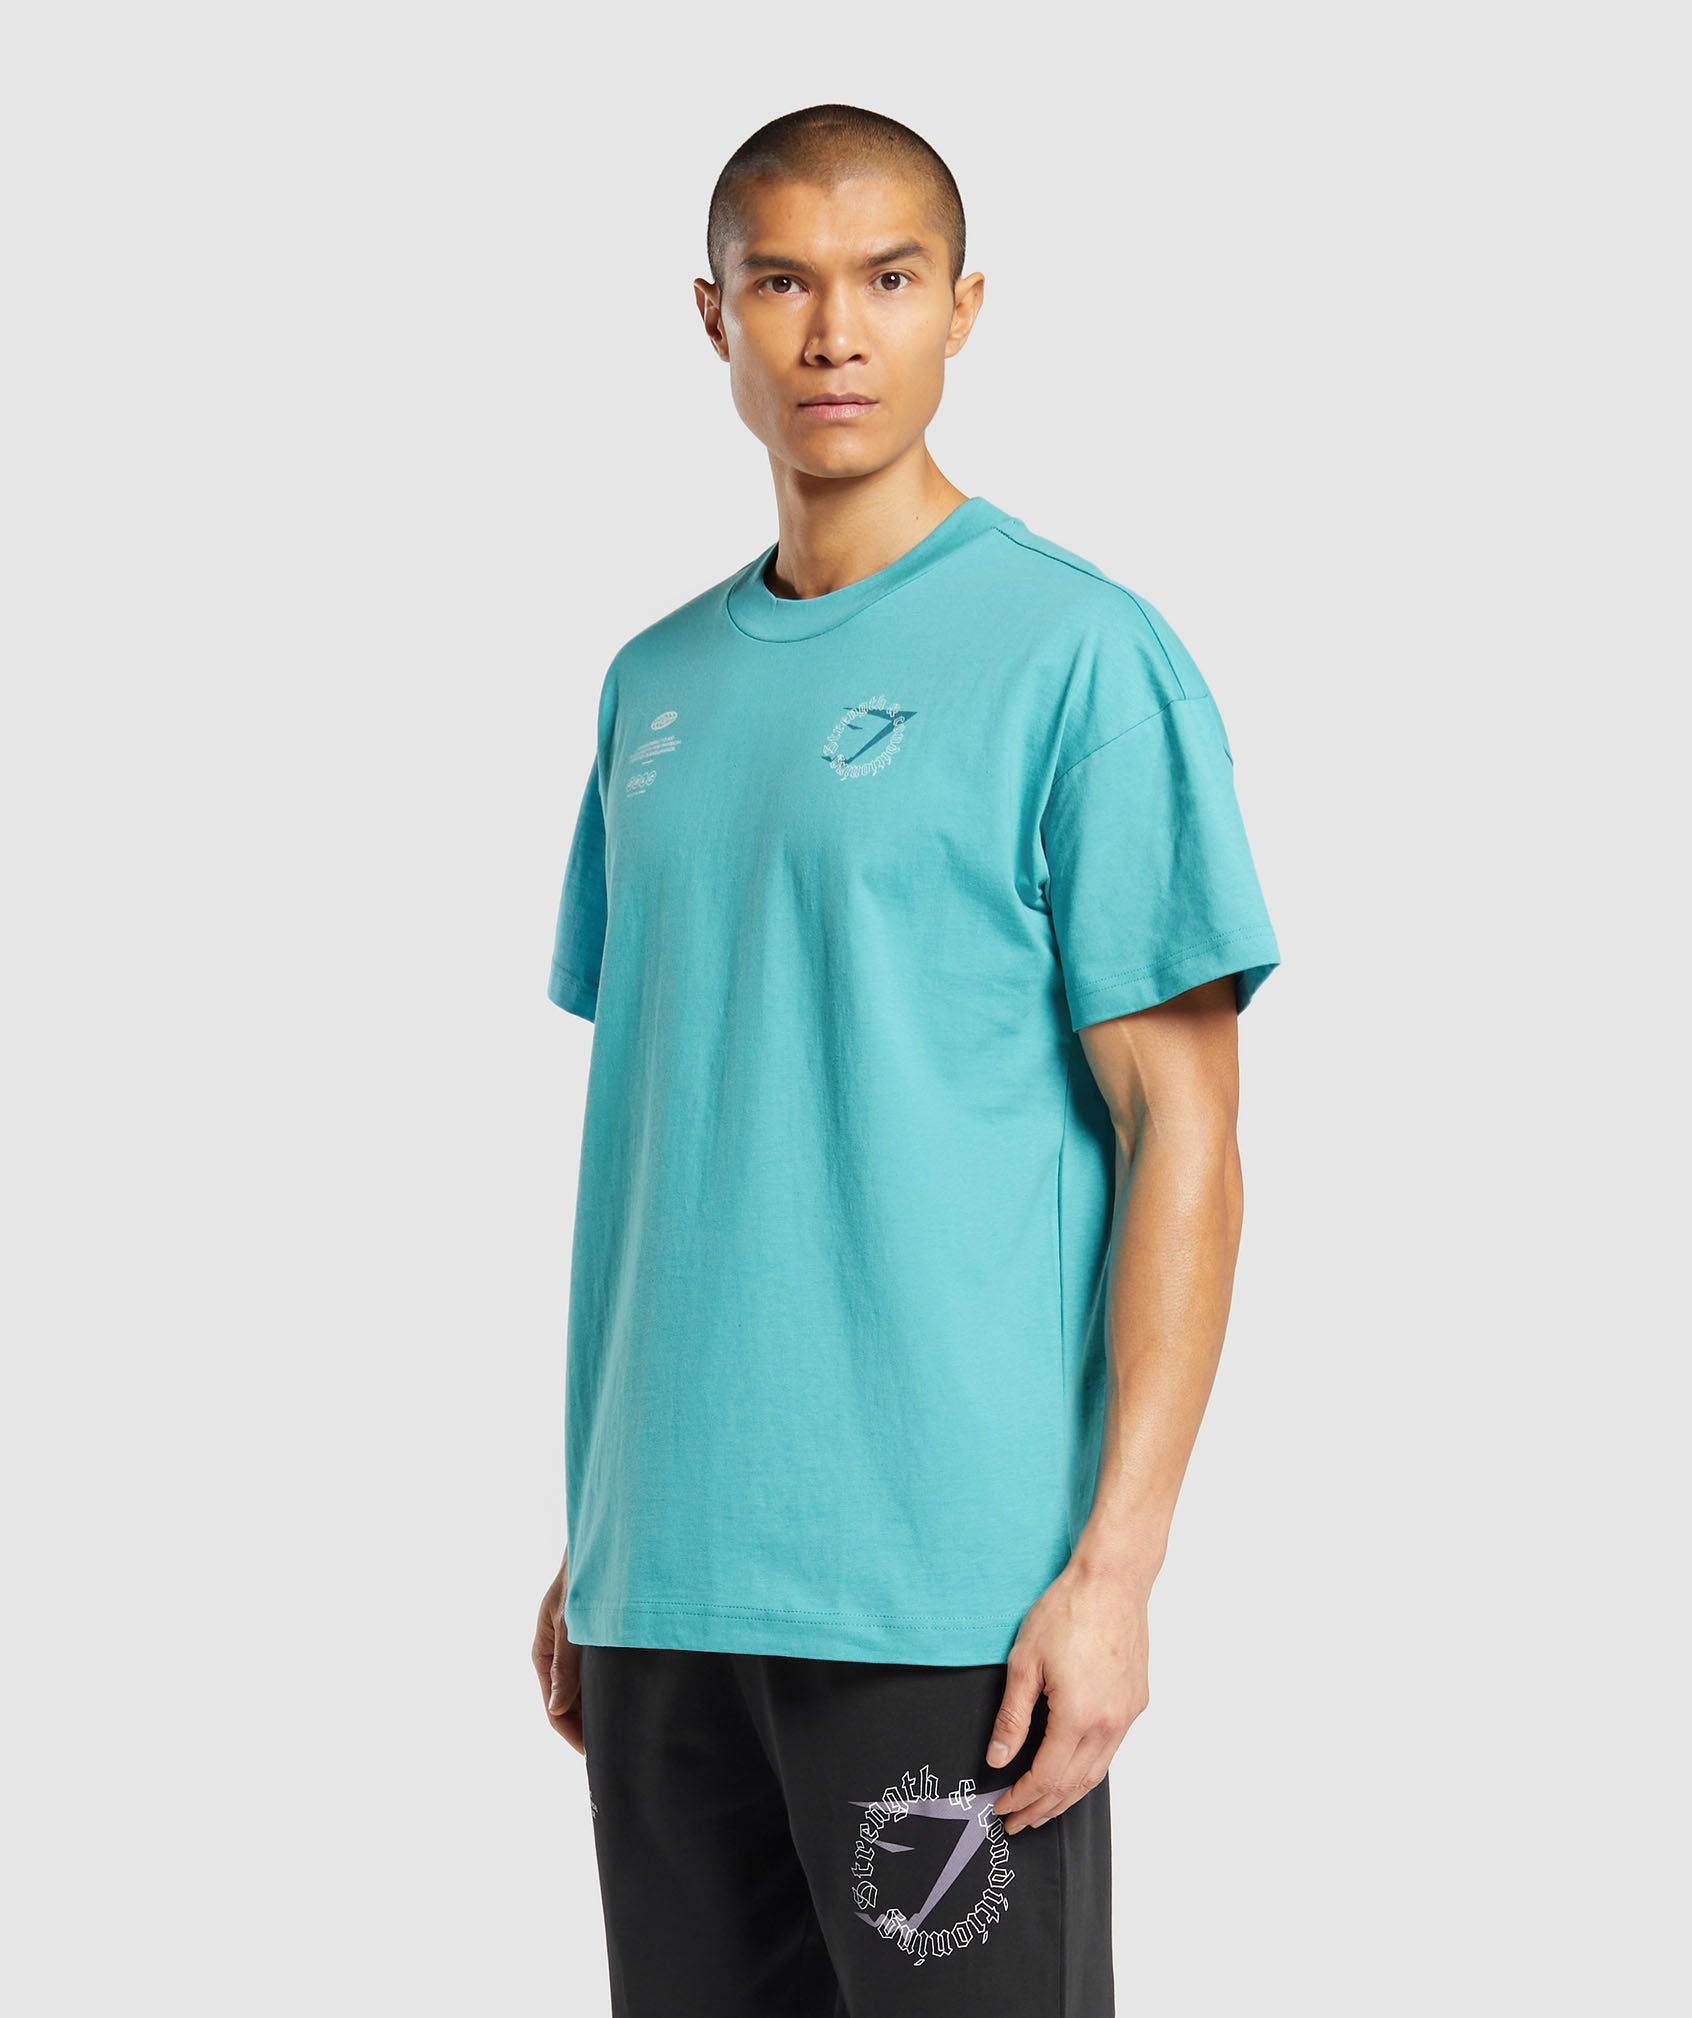 Strength and Conditioning T-Shirt in Artificial Teal - view 3